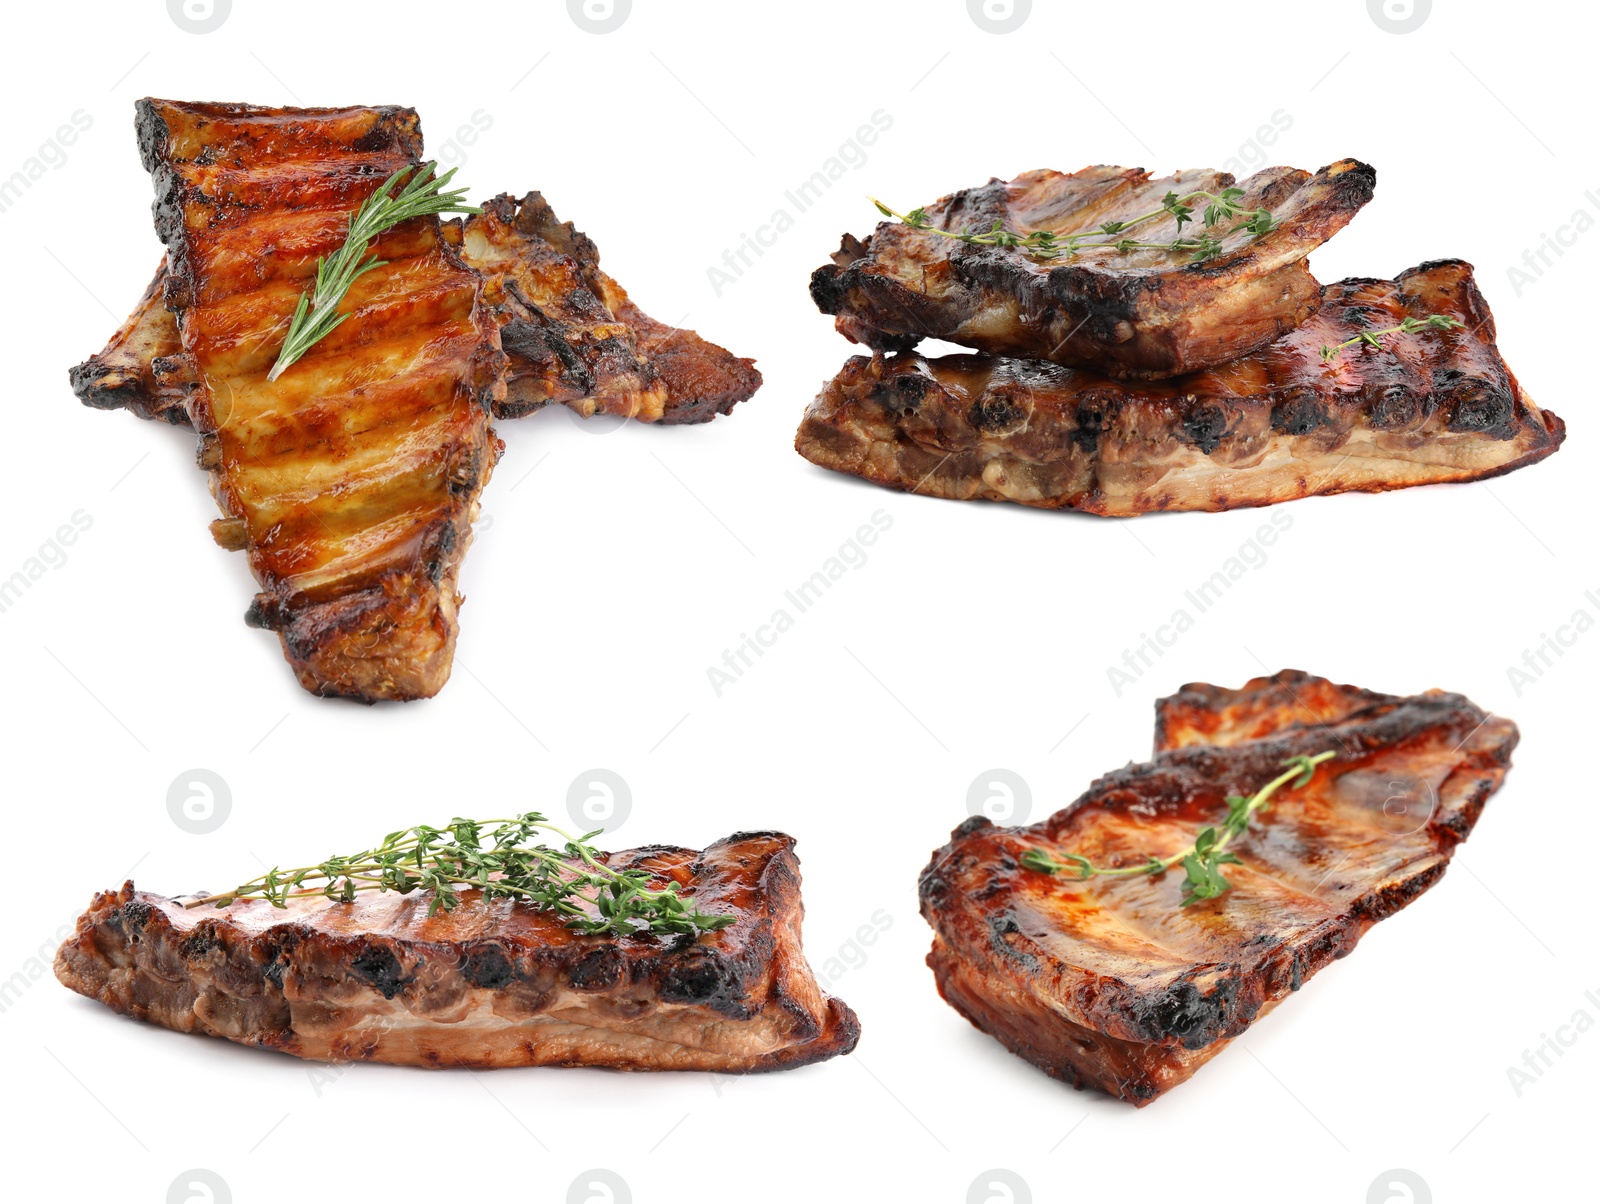 Image of Set of delicious roasted ribs on white background